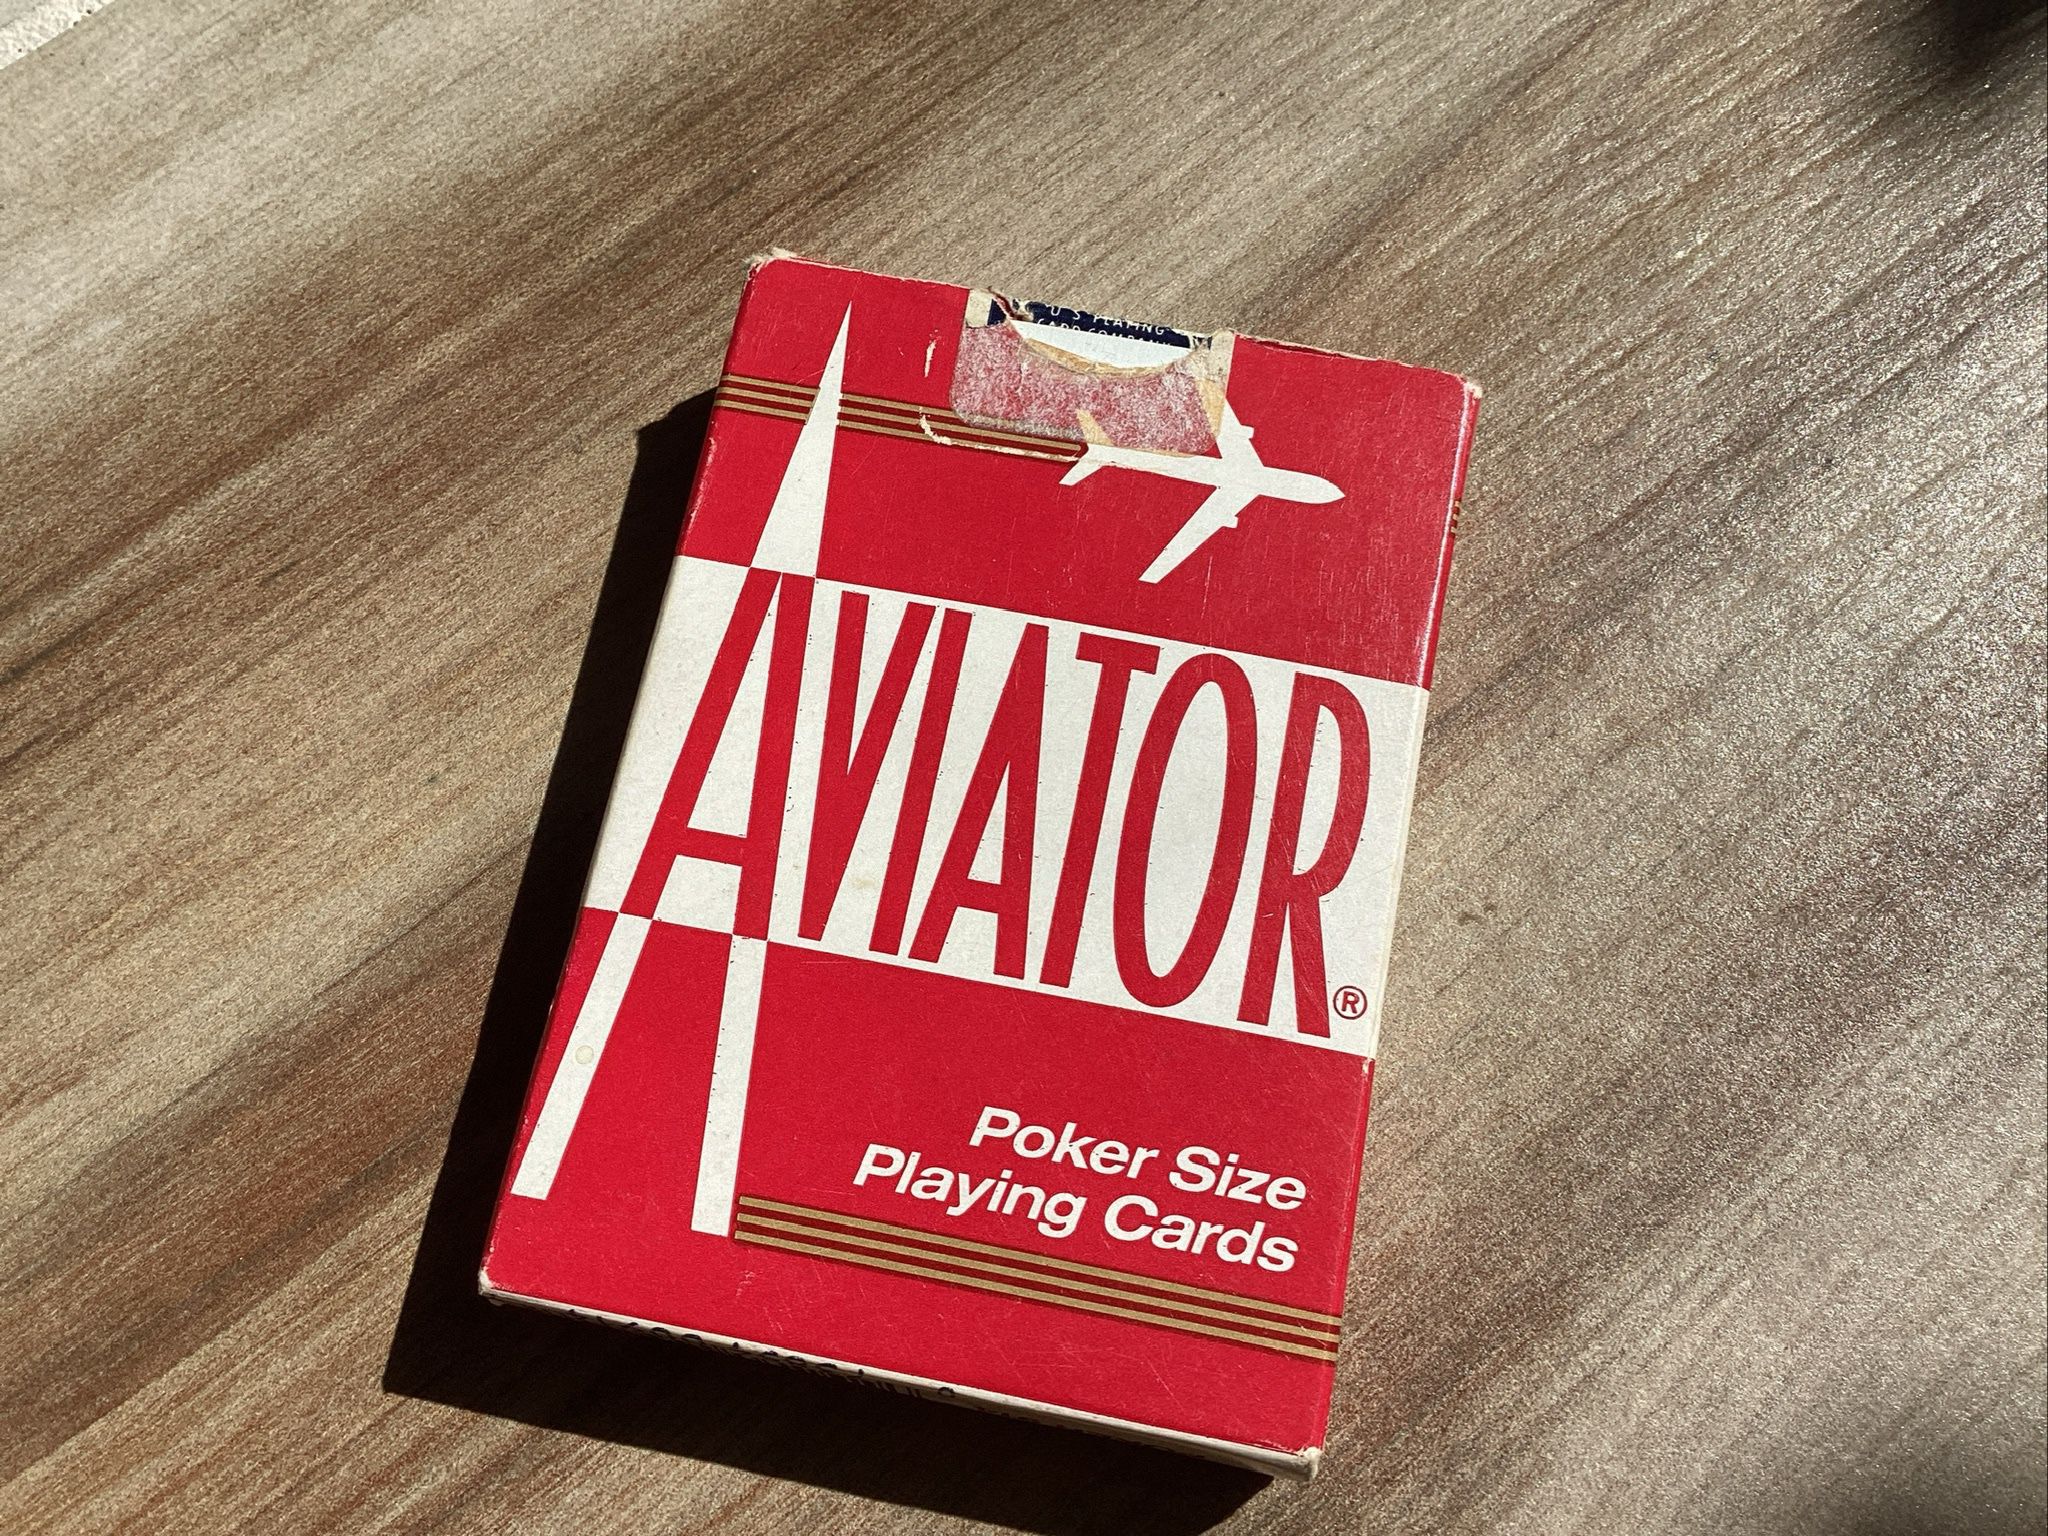 Aviator Red Poker Size 914 Playing Cards, Played In Terrible’s Hotel Casino